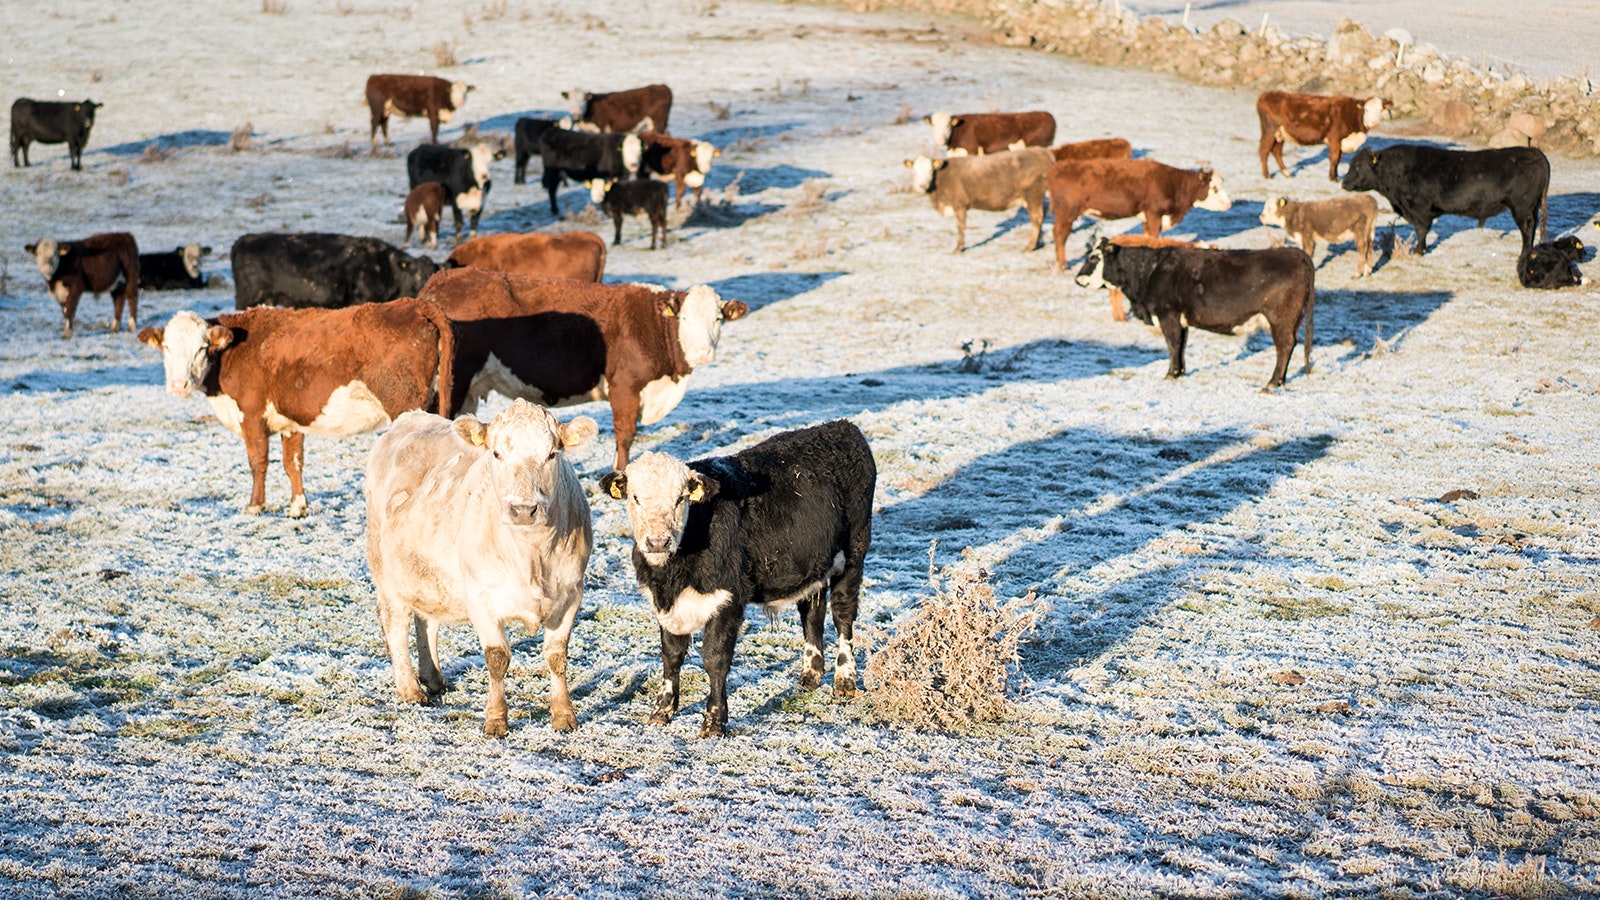 Cows in pasture with snow 2 14 24